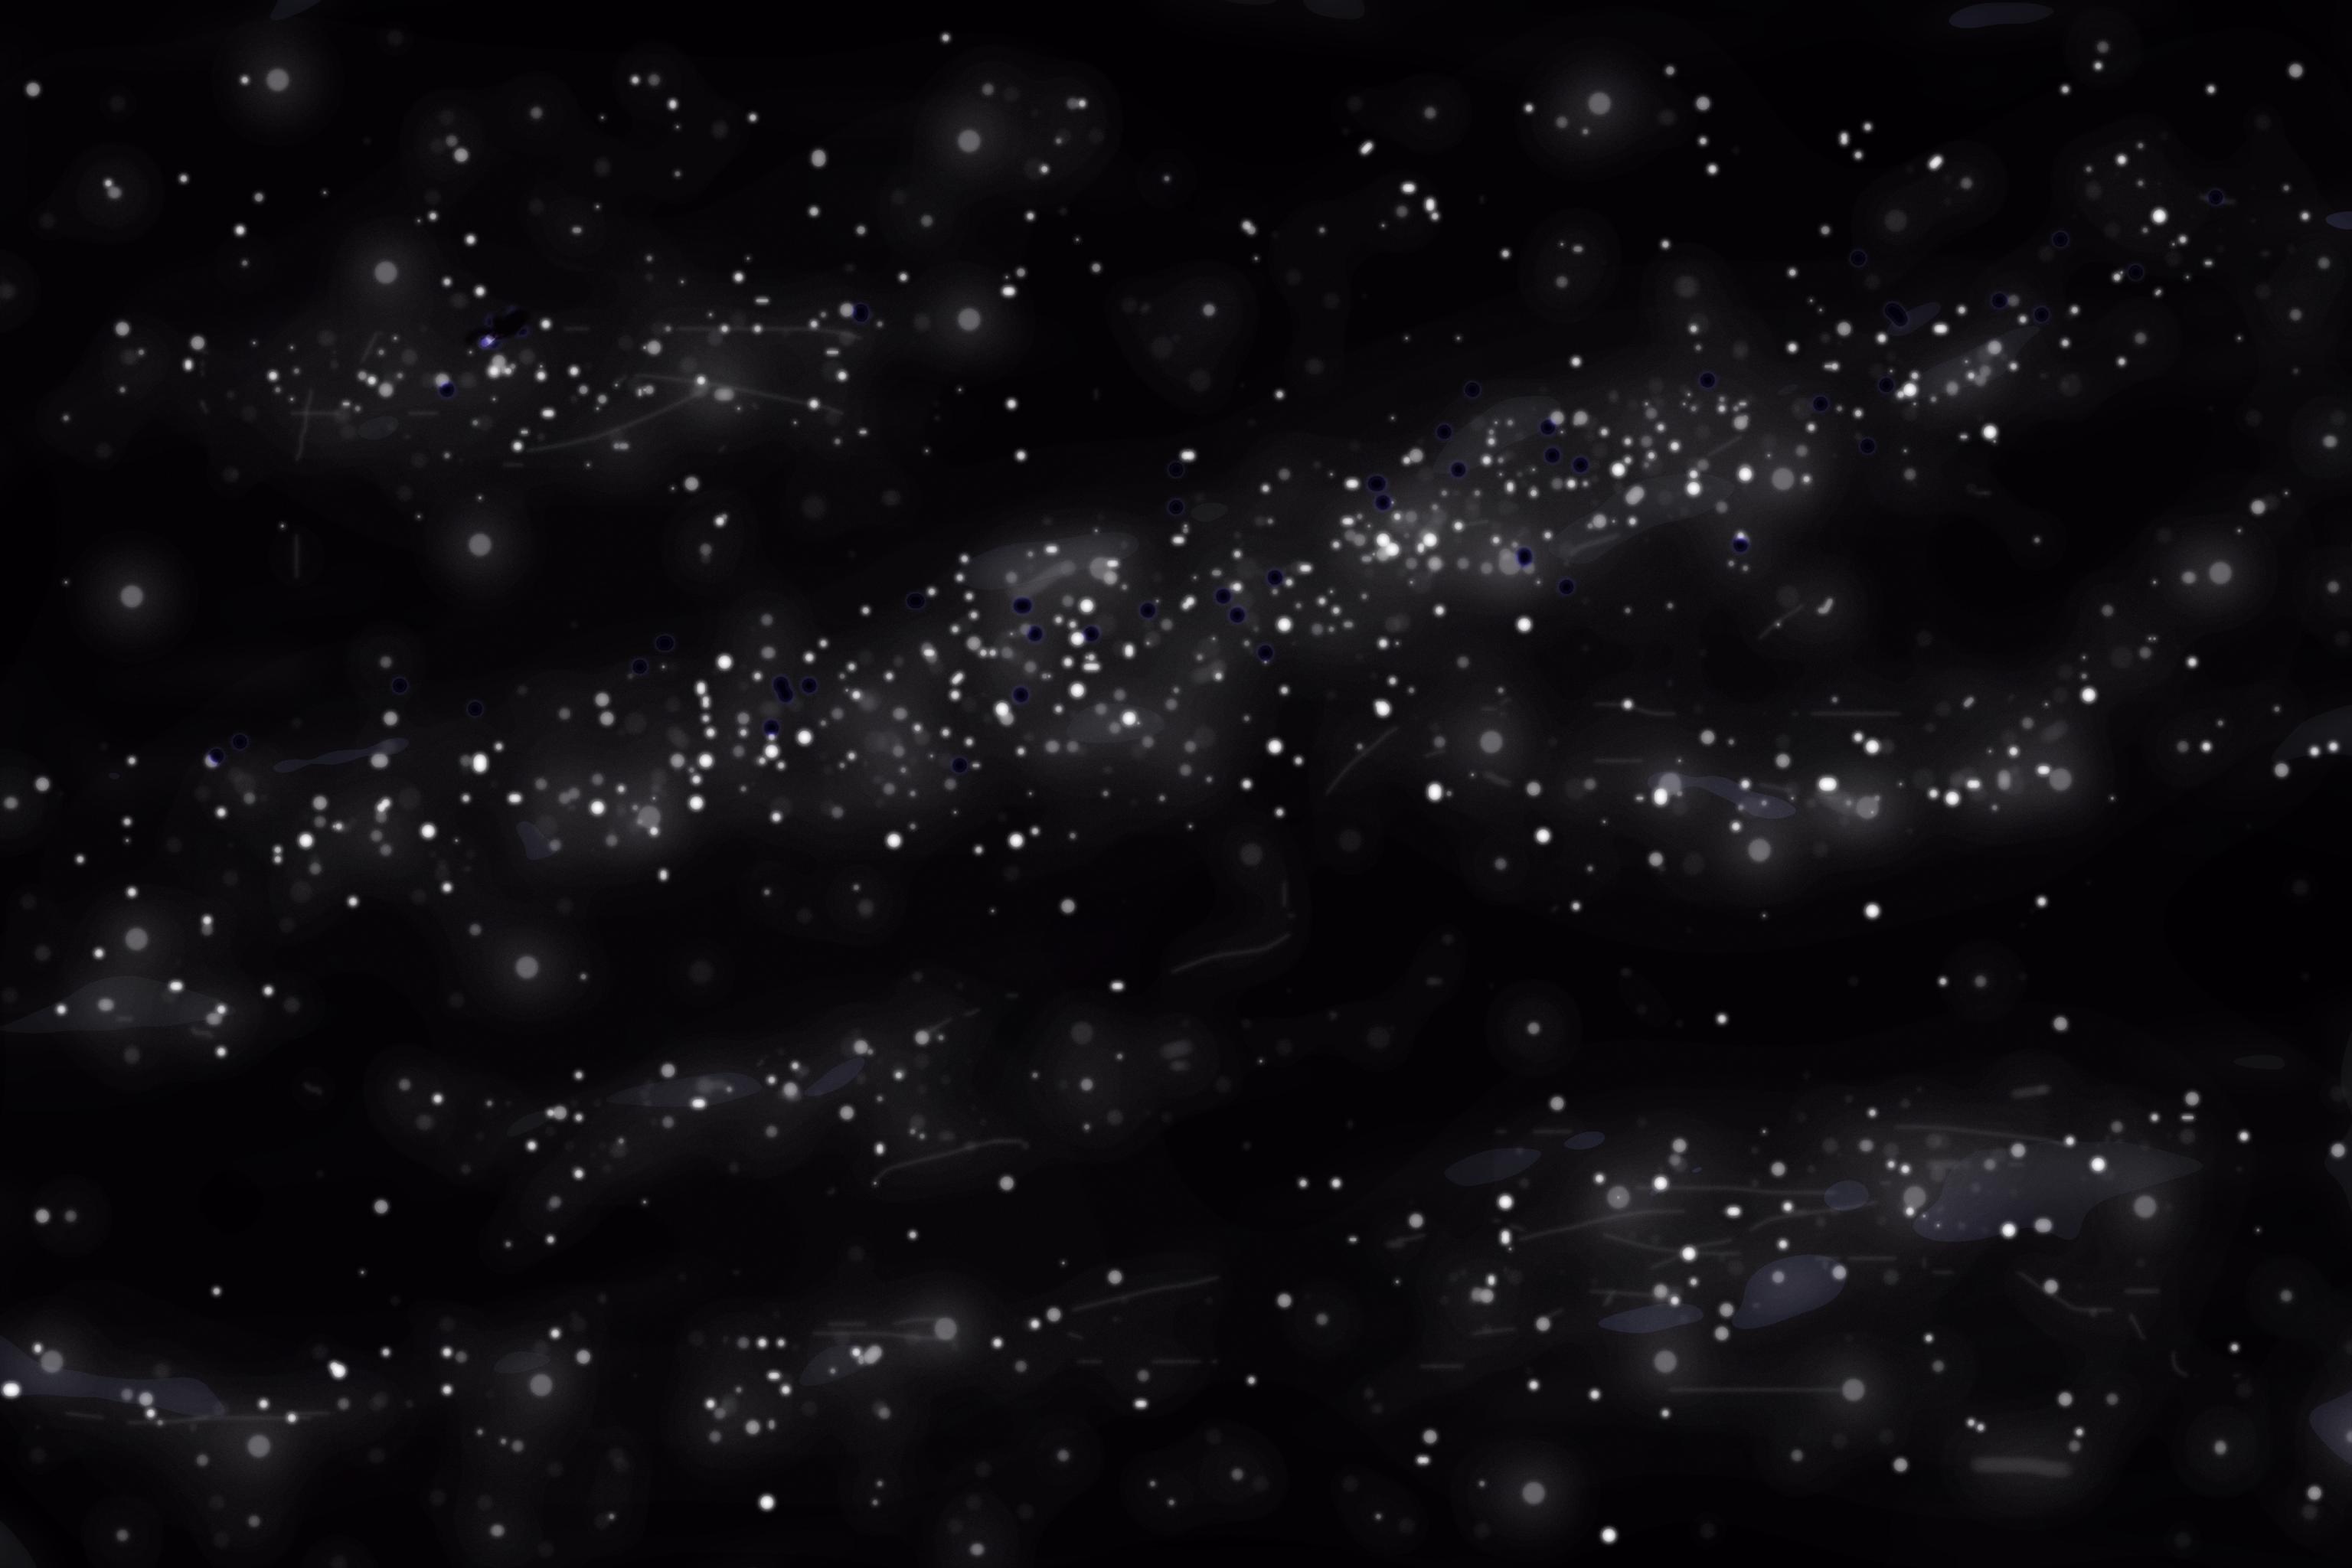  Stars  Backgrounds  Wallpaper  Cave